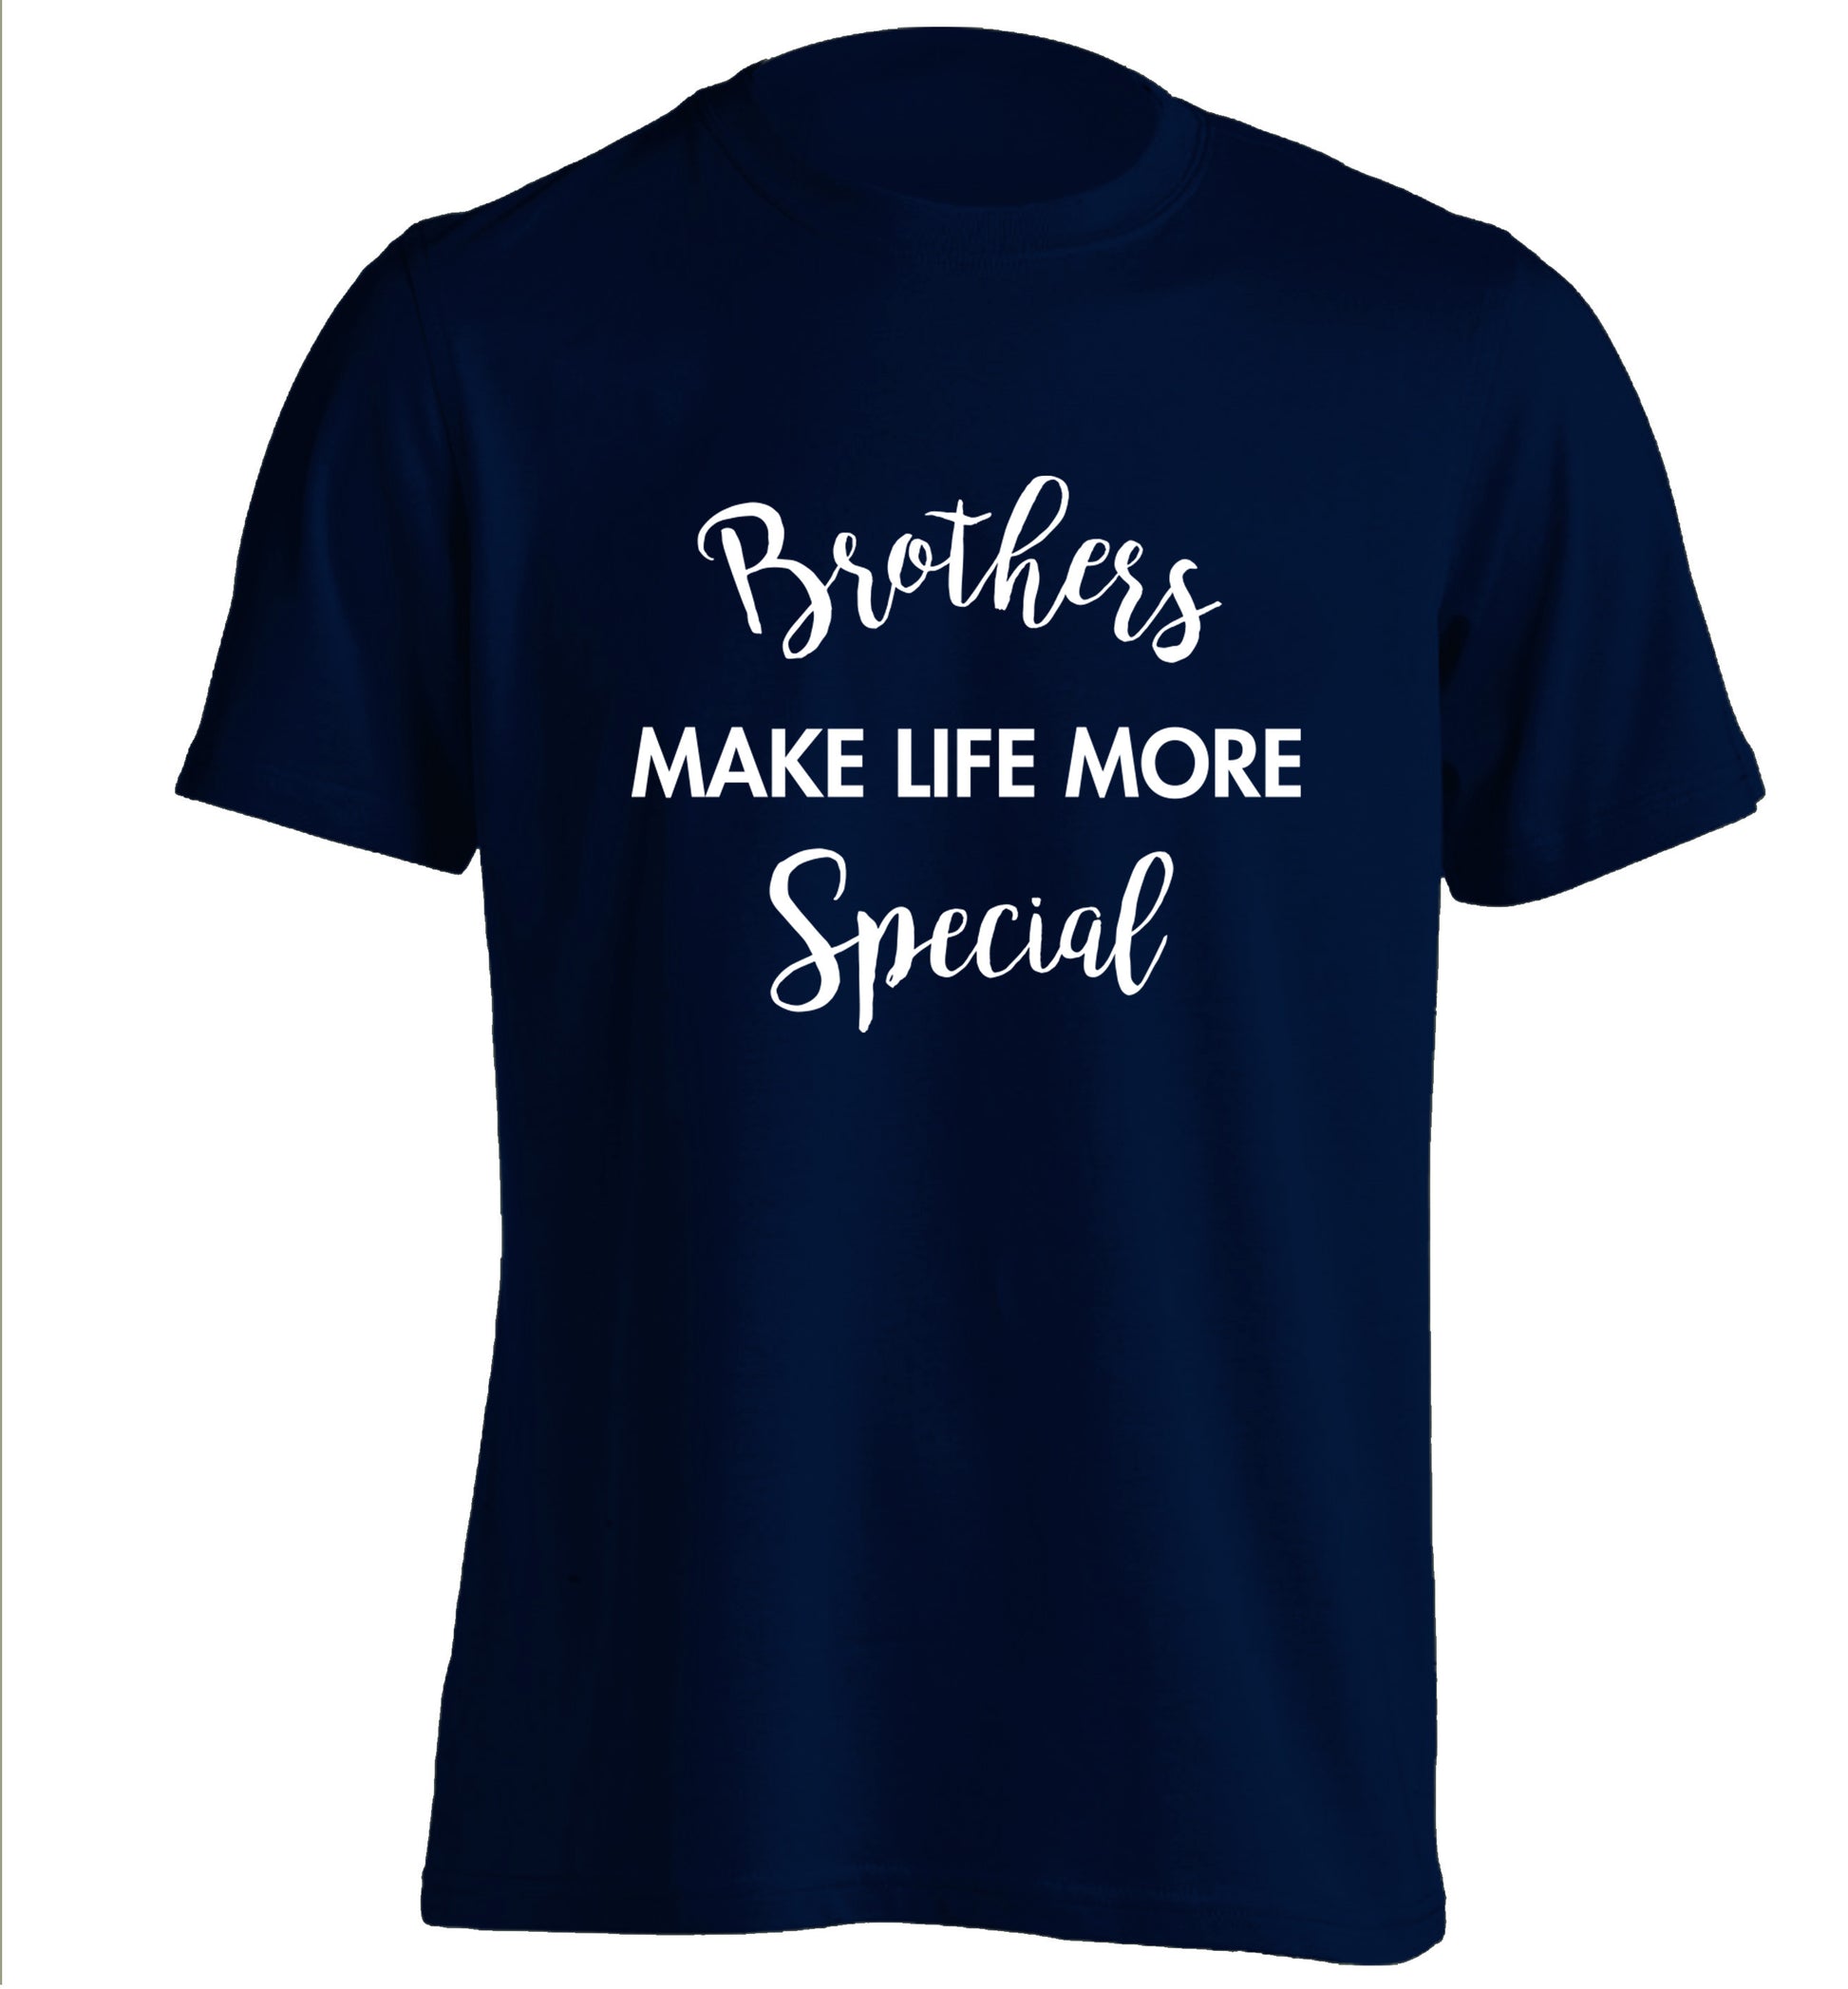 Brothers make life more special adults unisex navy Tshirt 2XL